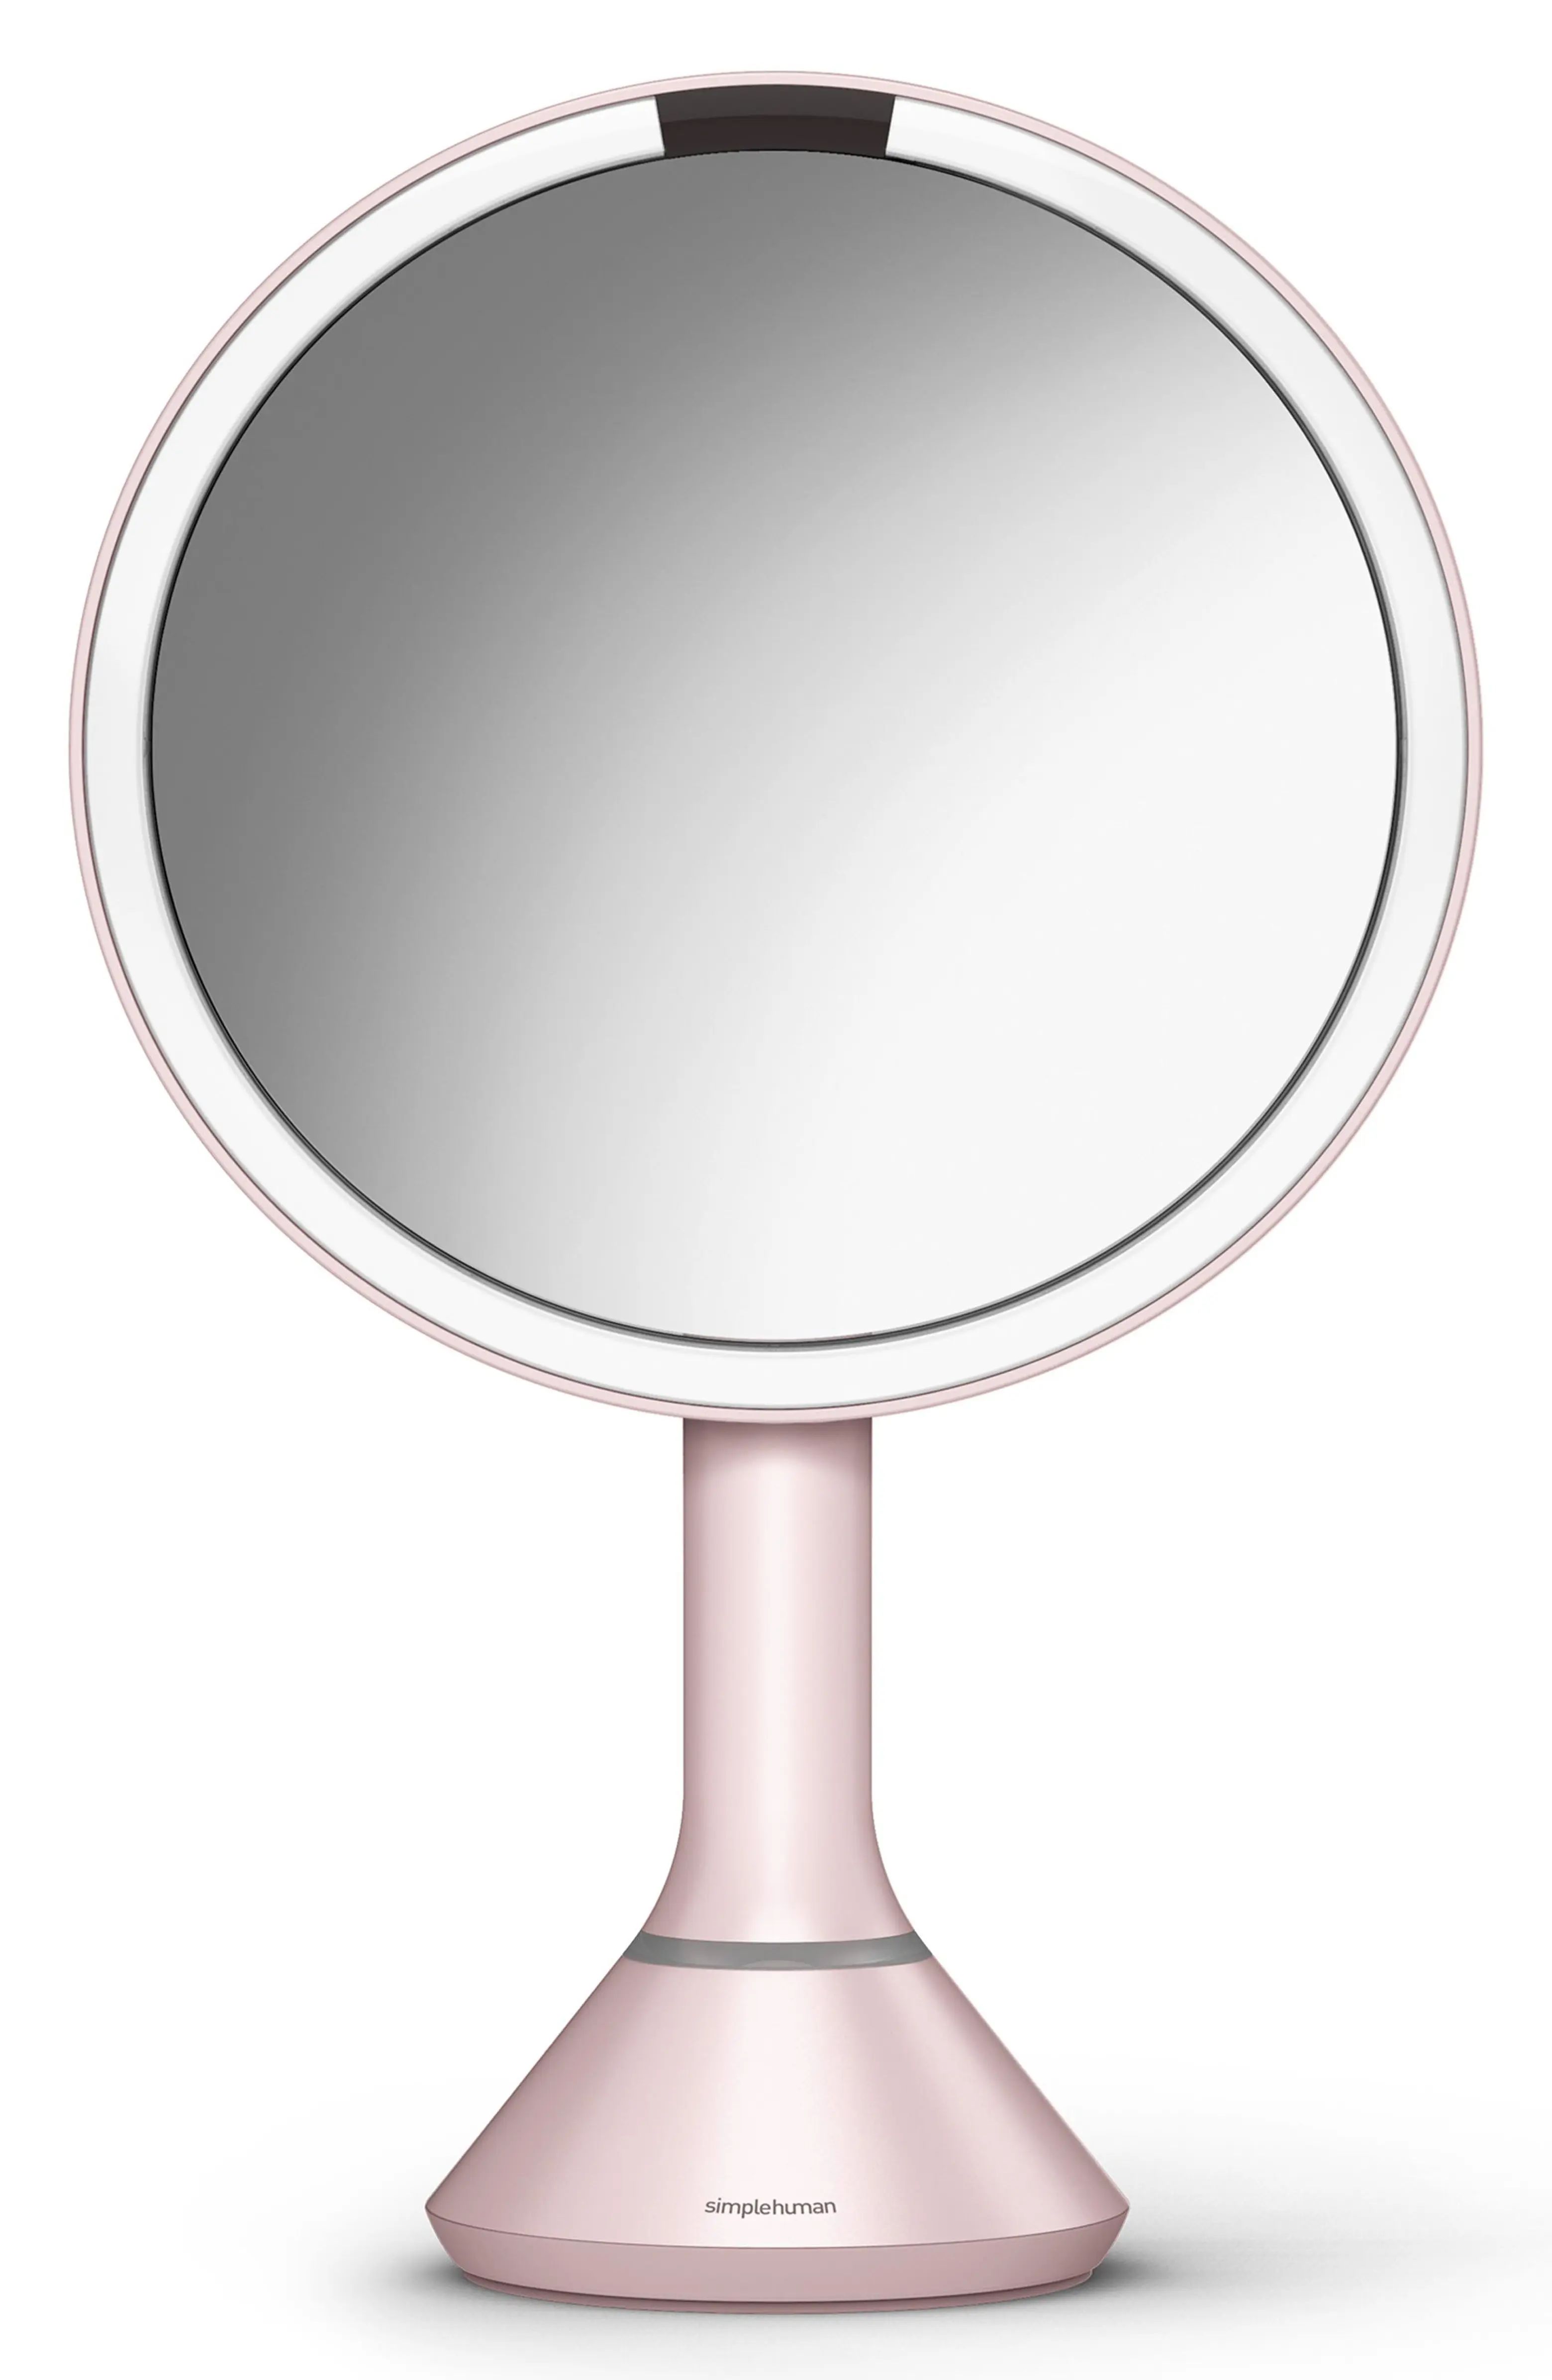 Eight Inch Sensor Makeup Mirror with Brightness Control | Nordstrom